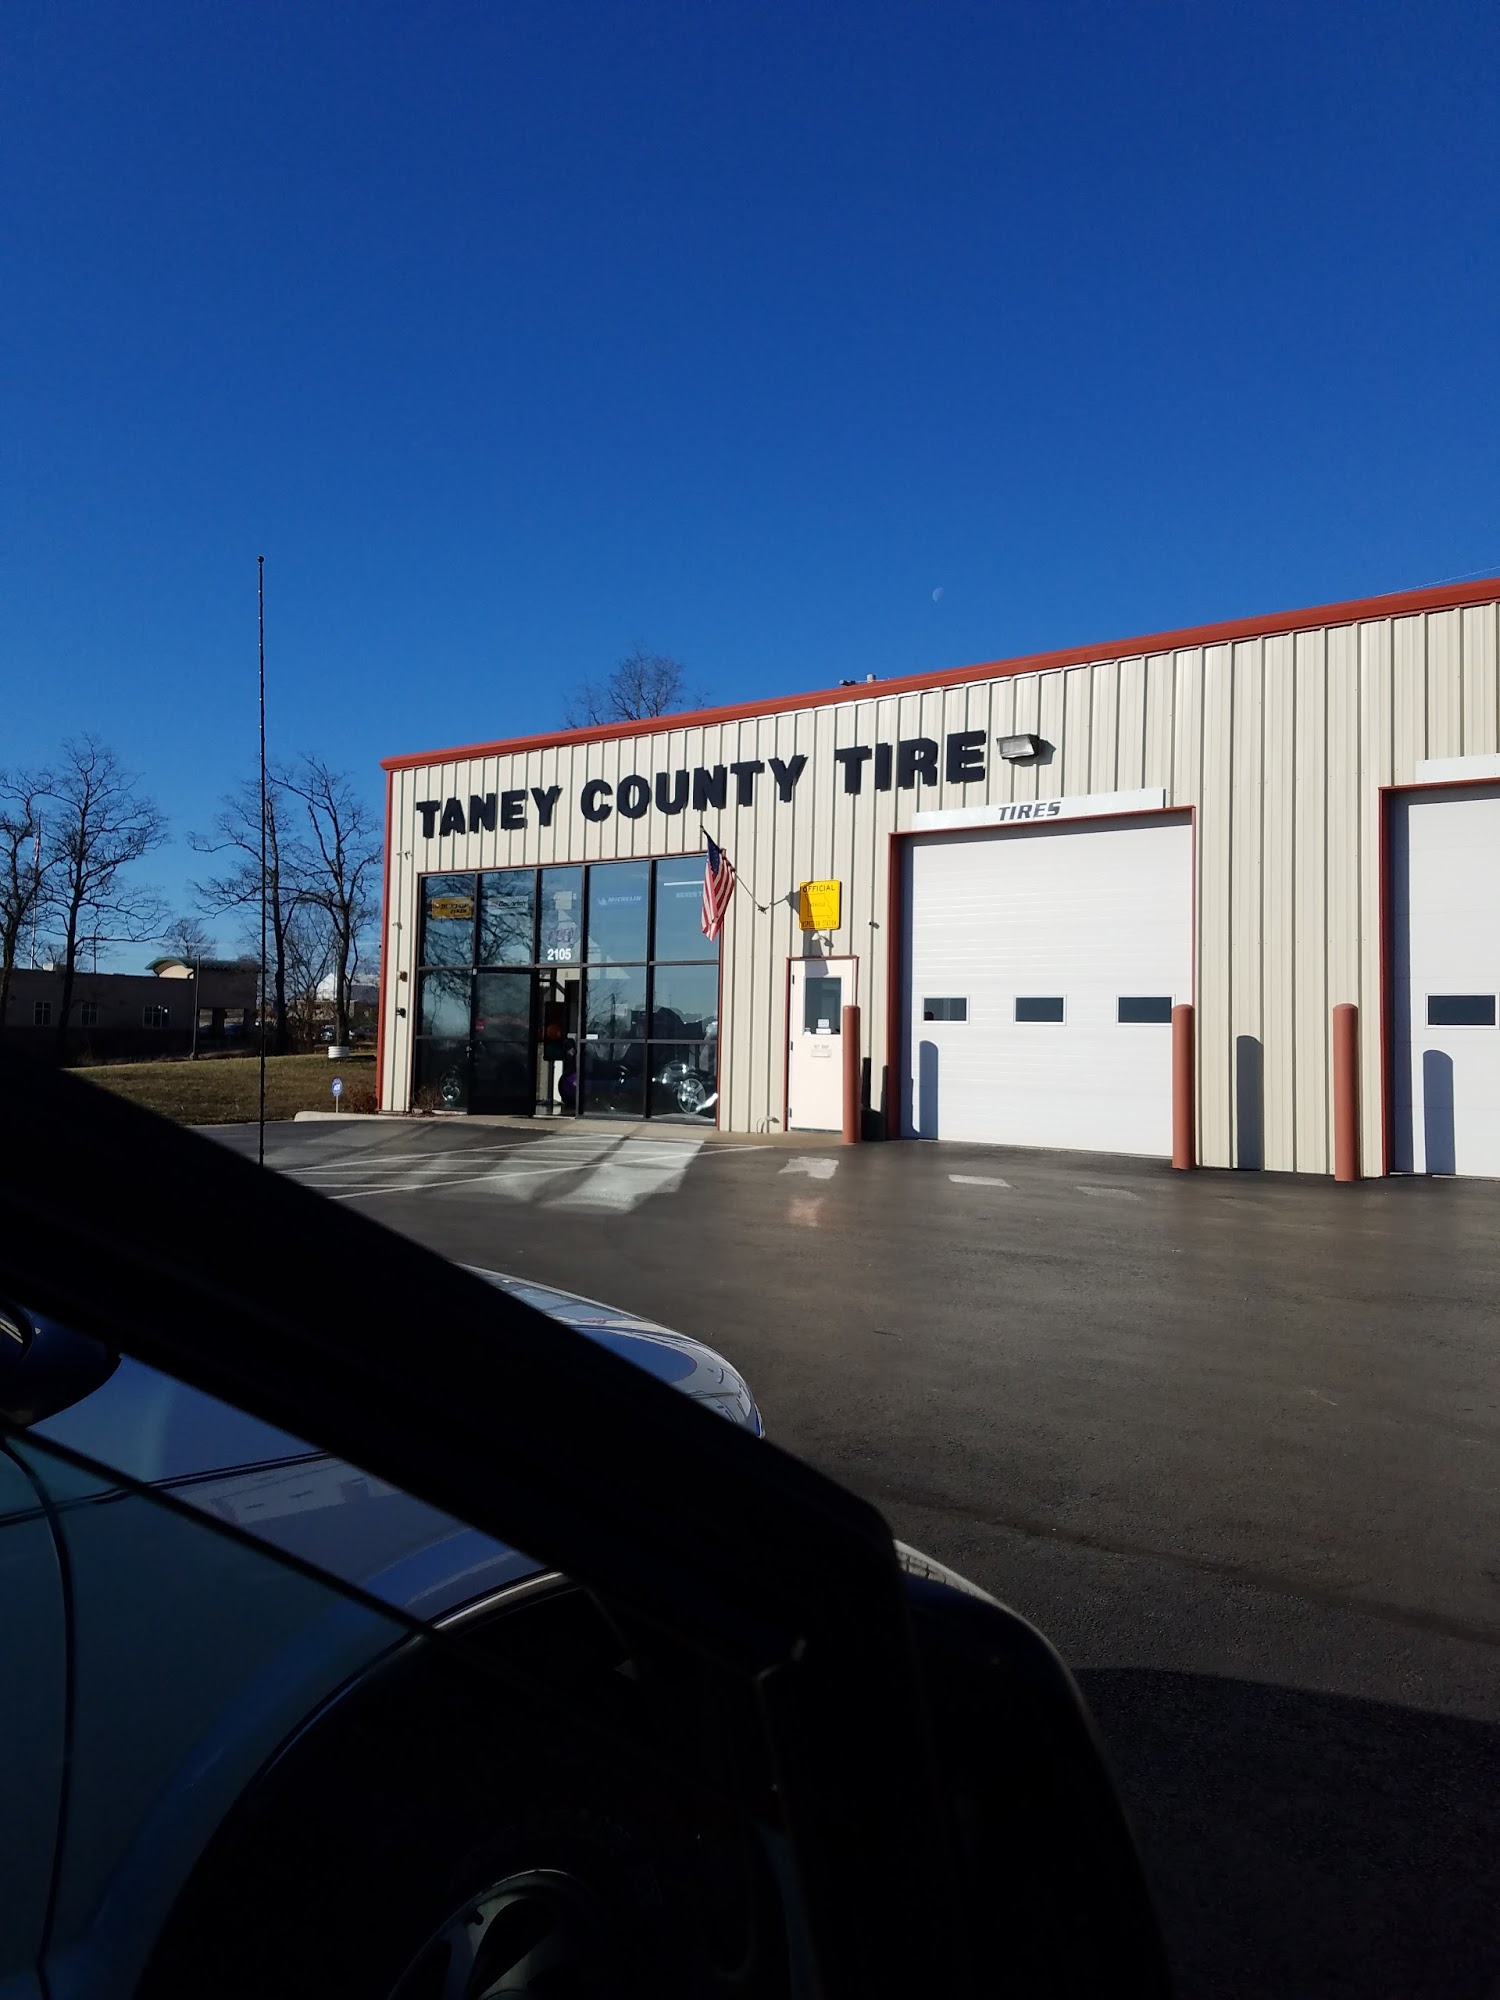 Taney County Tire and Towing